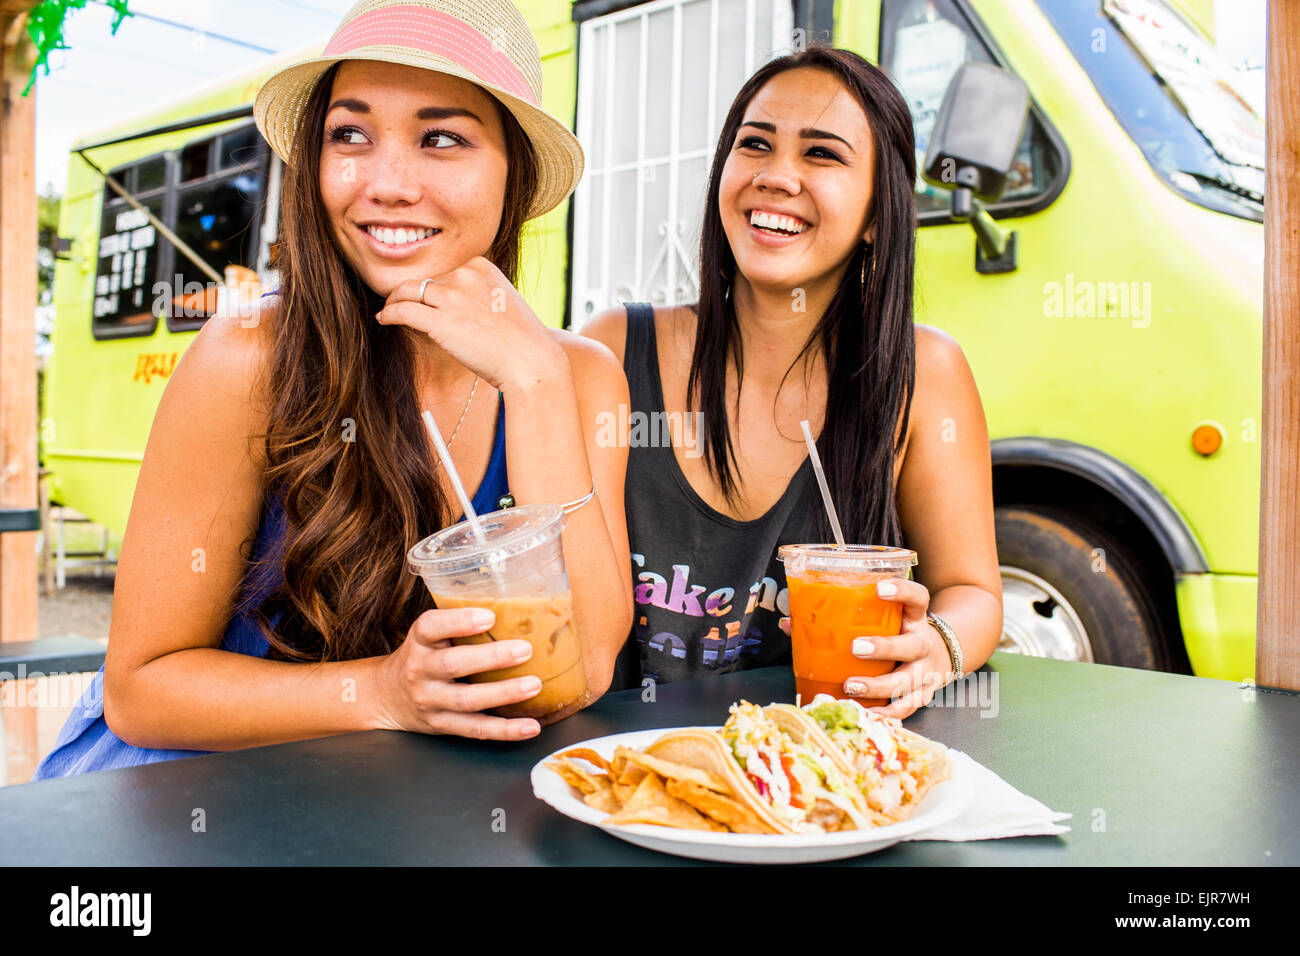 Pacific Islander women eating and drinking near food cart Stock Photo